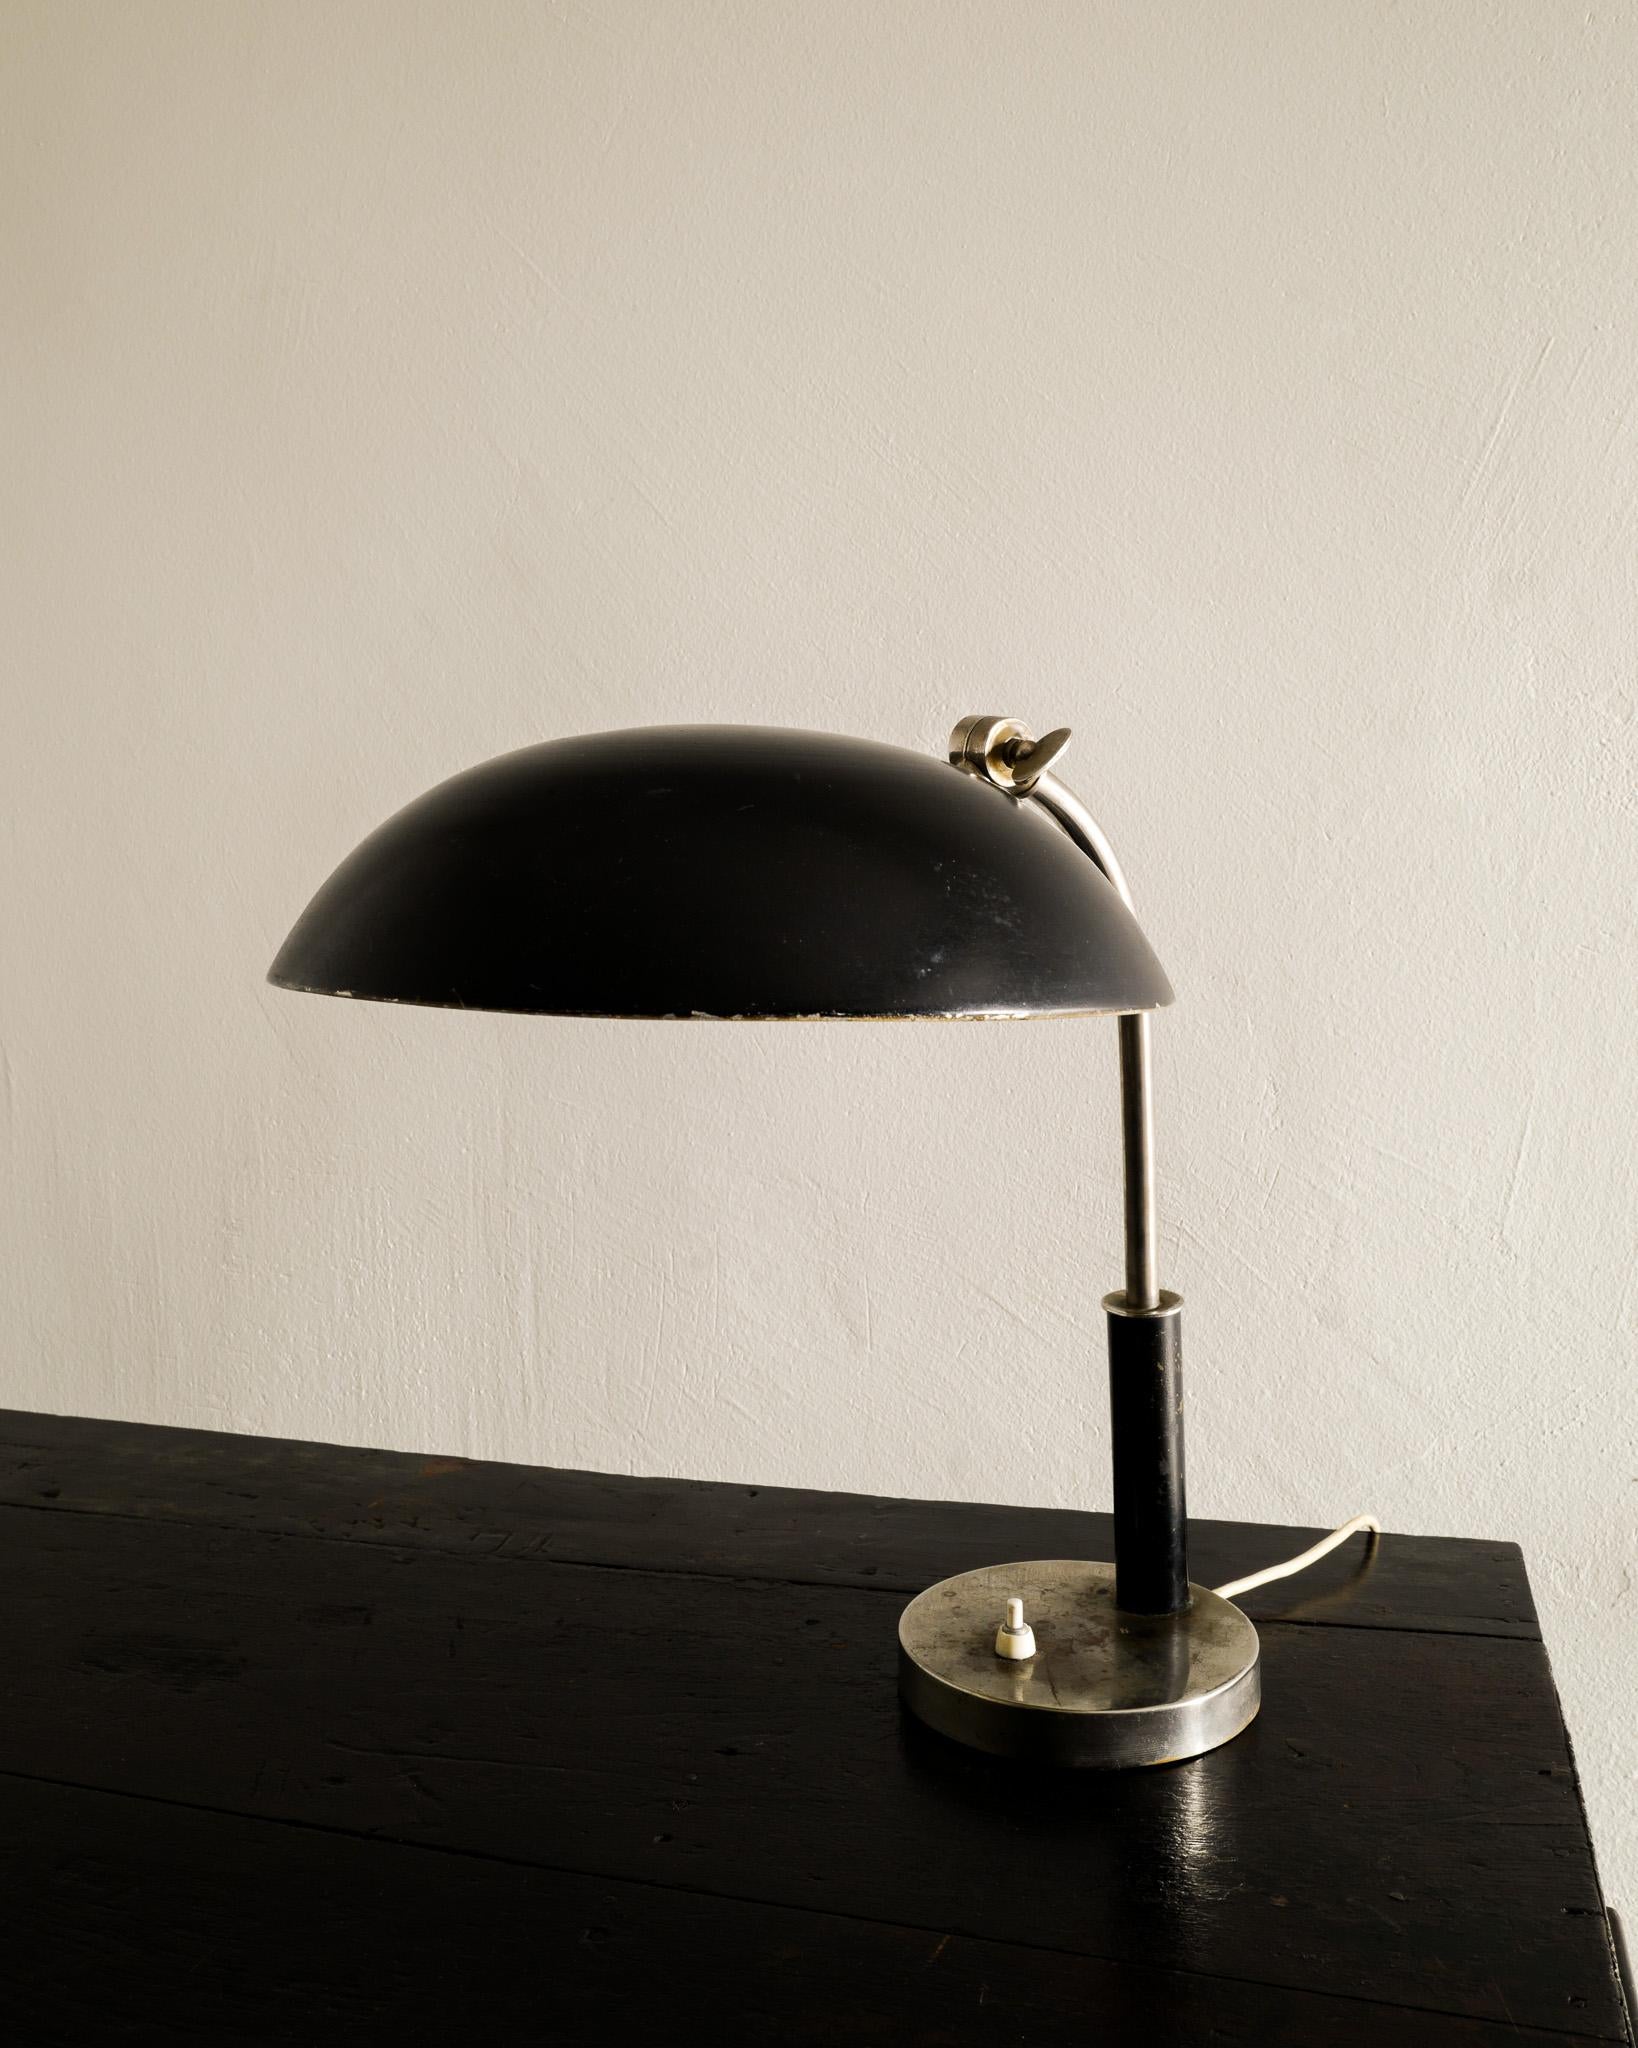 Rare mid century table / desk lamp in metal produced in Sweden 1940s. In good original condition with patina from age and use. Working well. 

Dimensions: H: 38 cm / 14.95